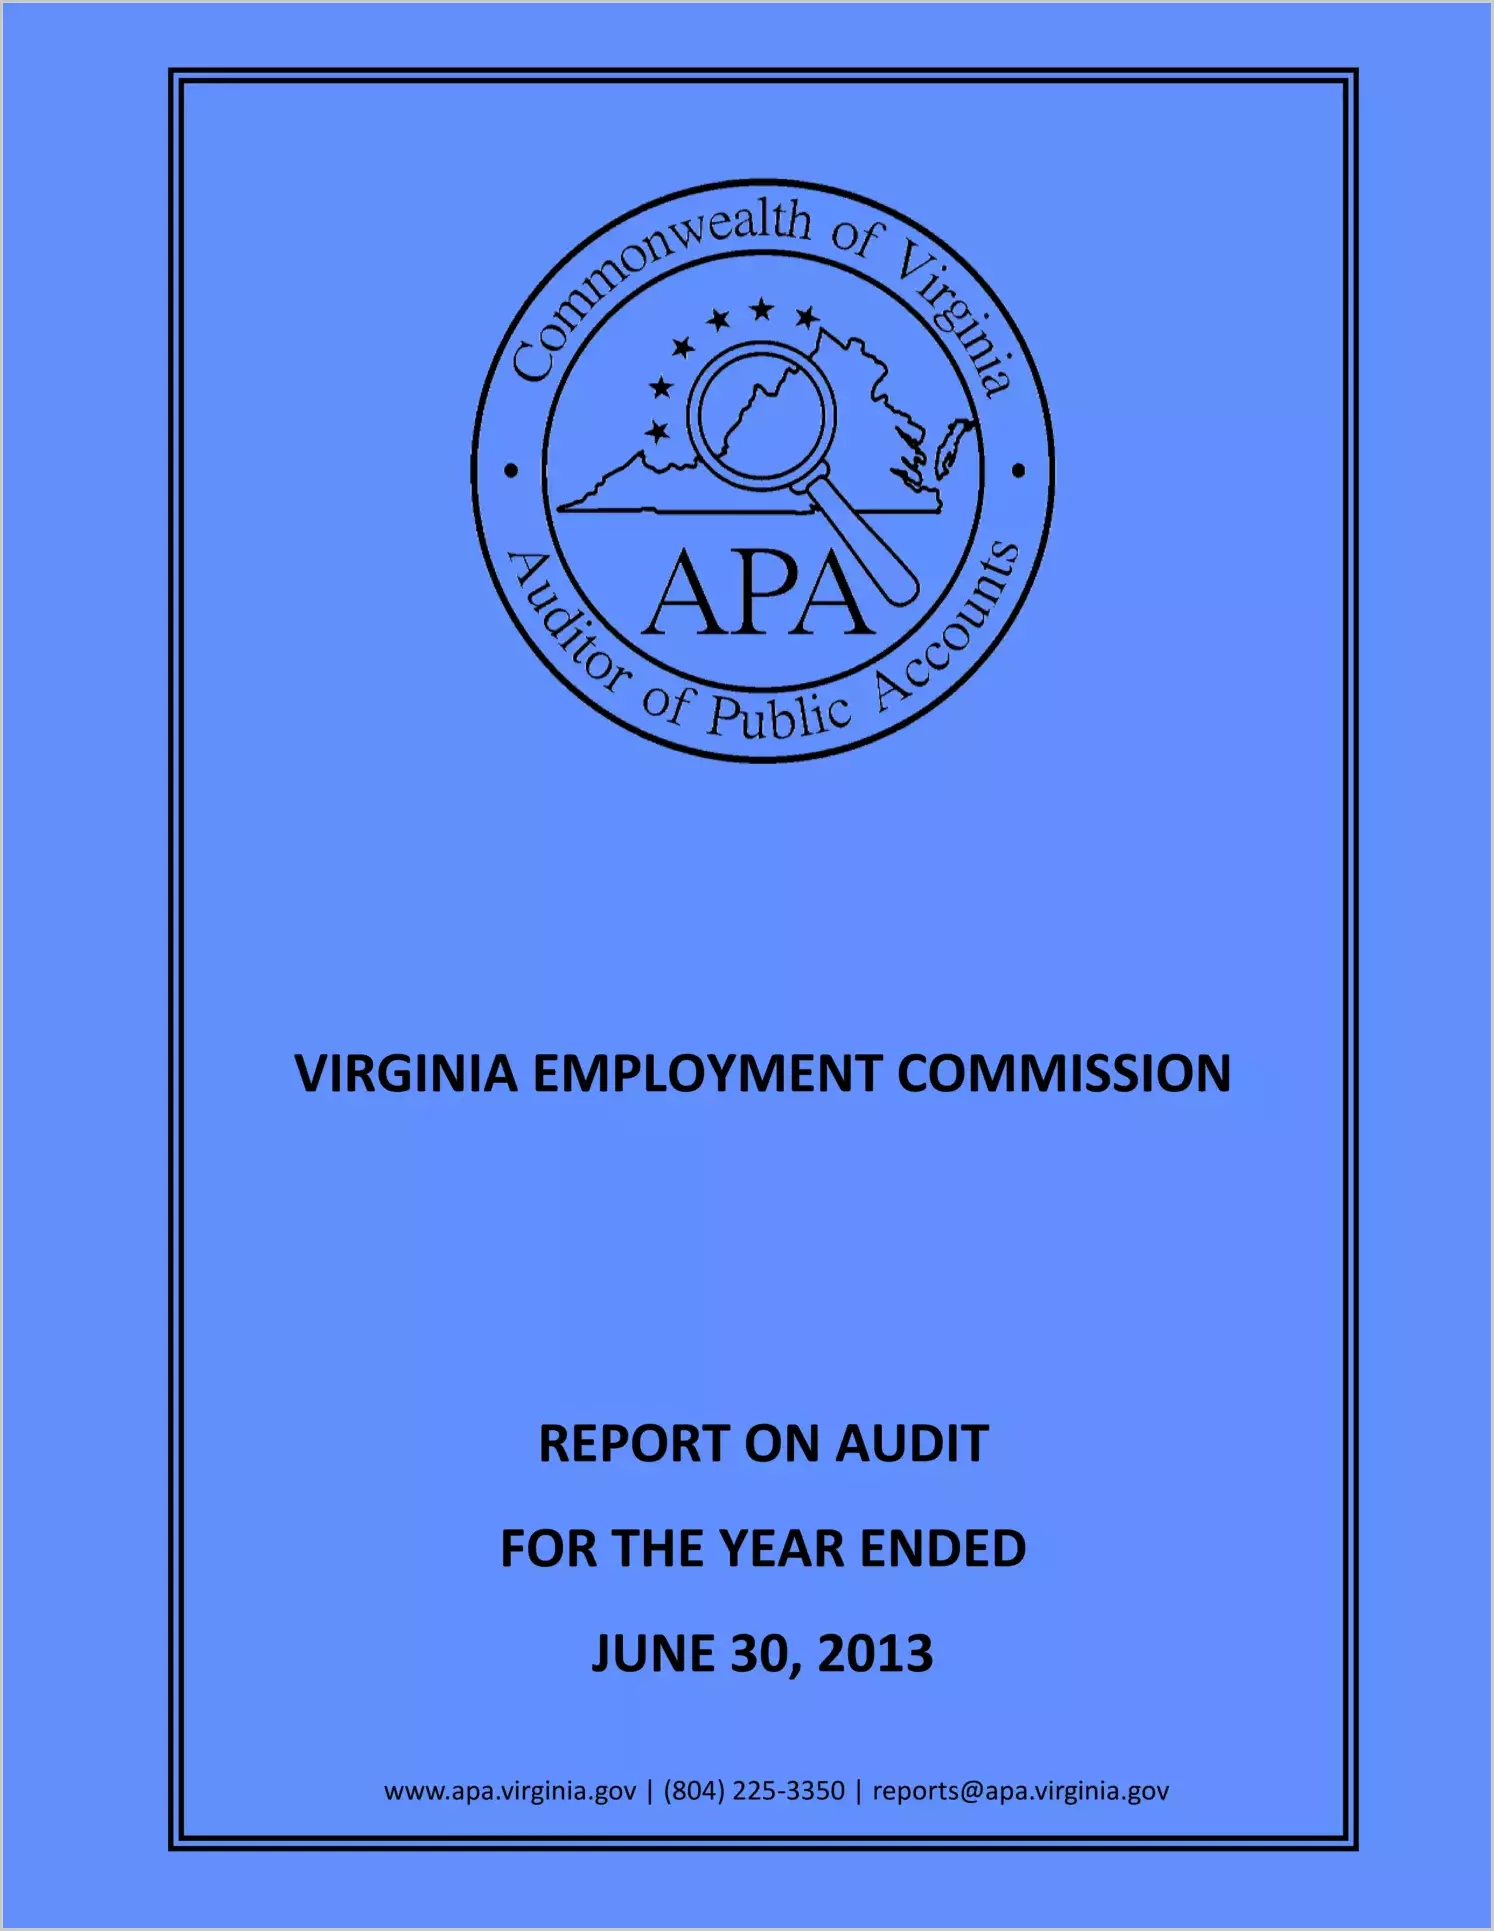 Virginia Employment Commission for the year ended June 30, 2013